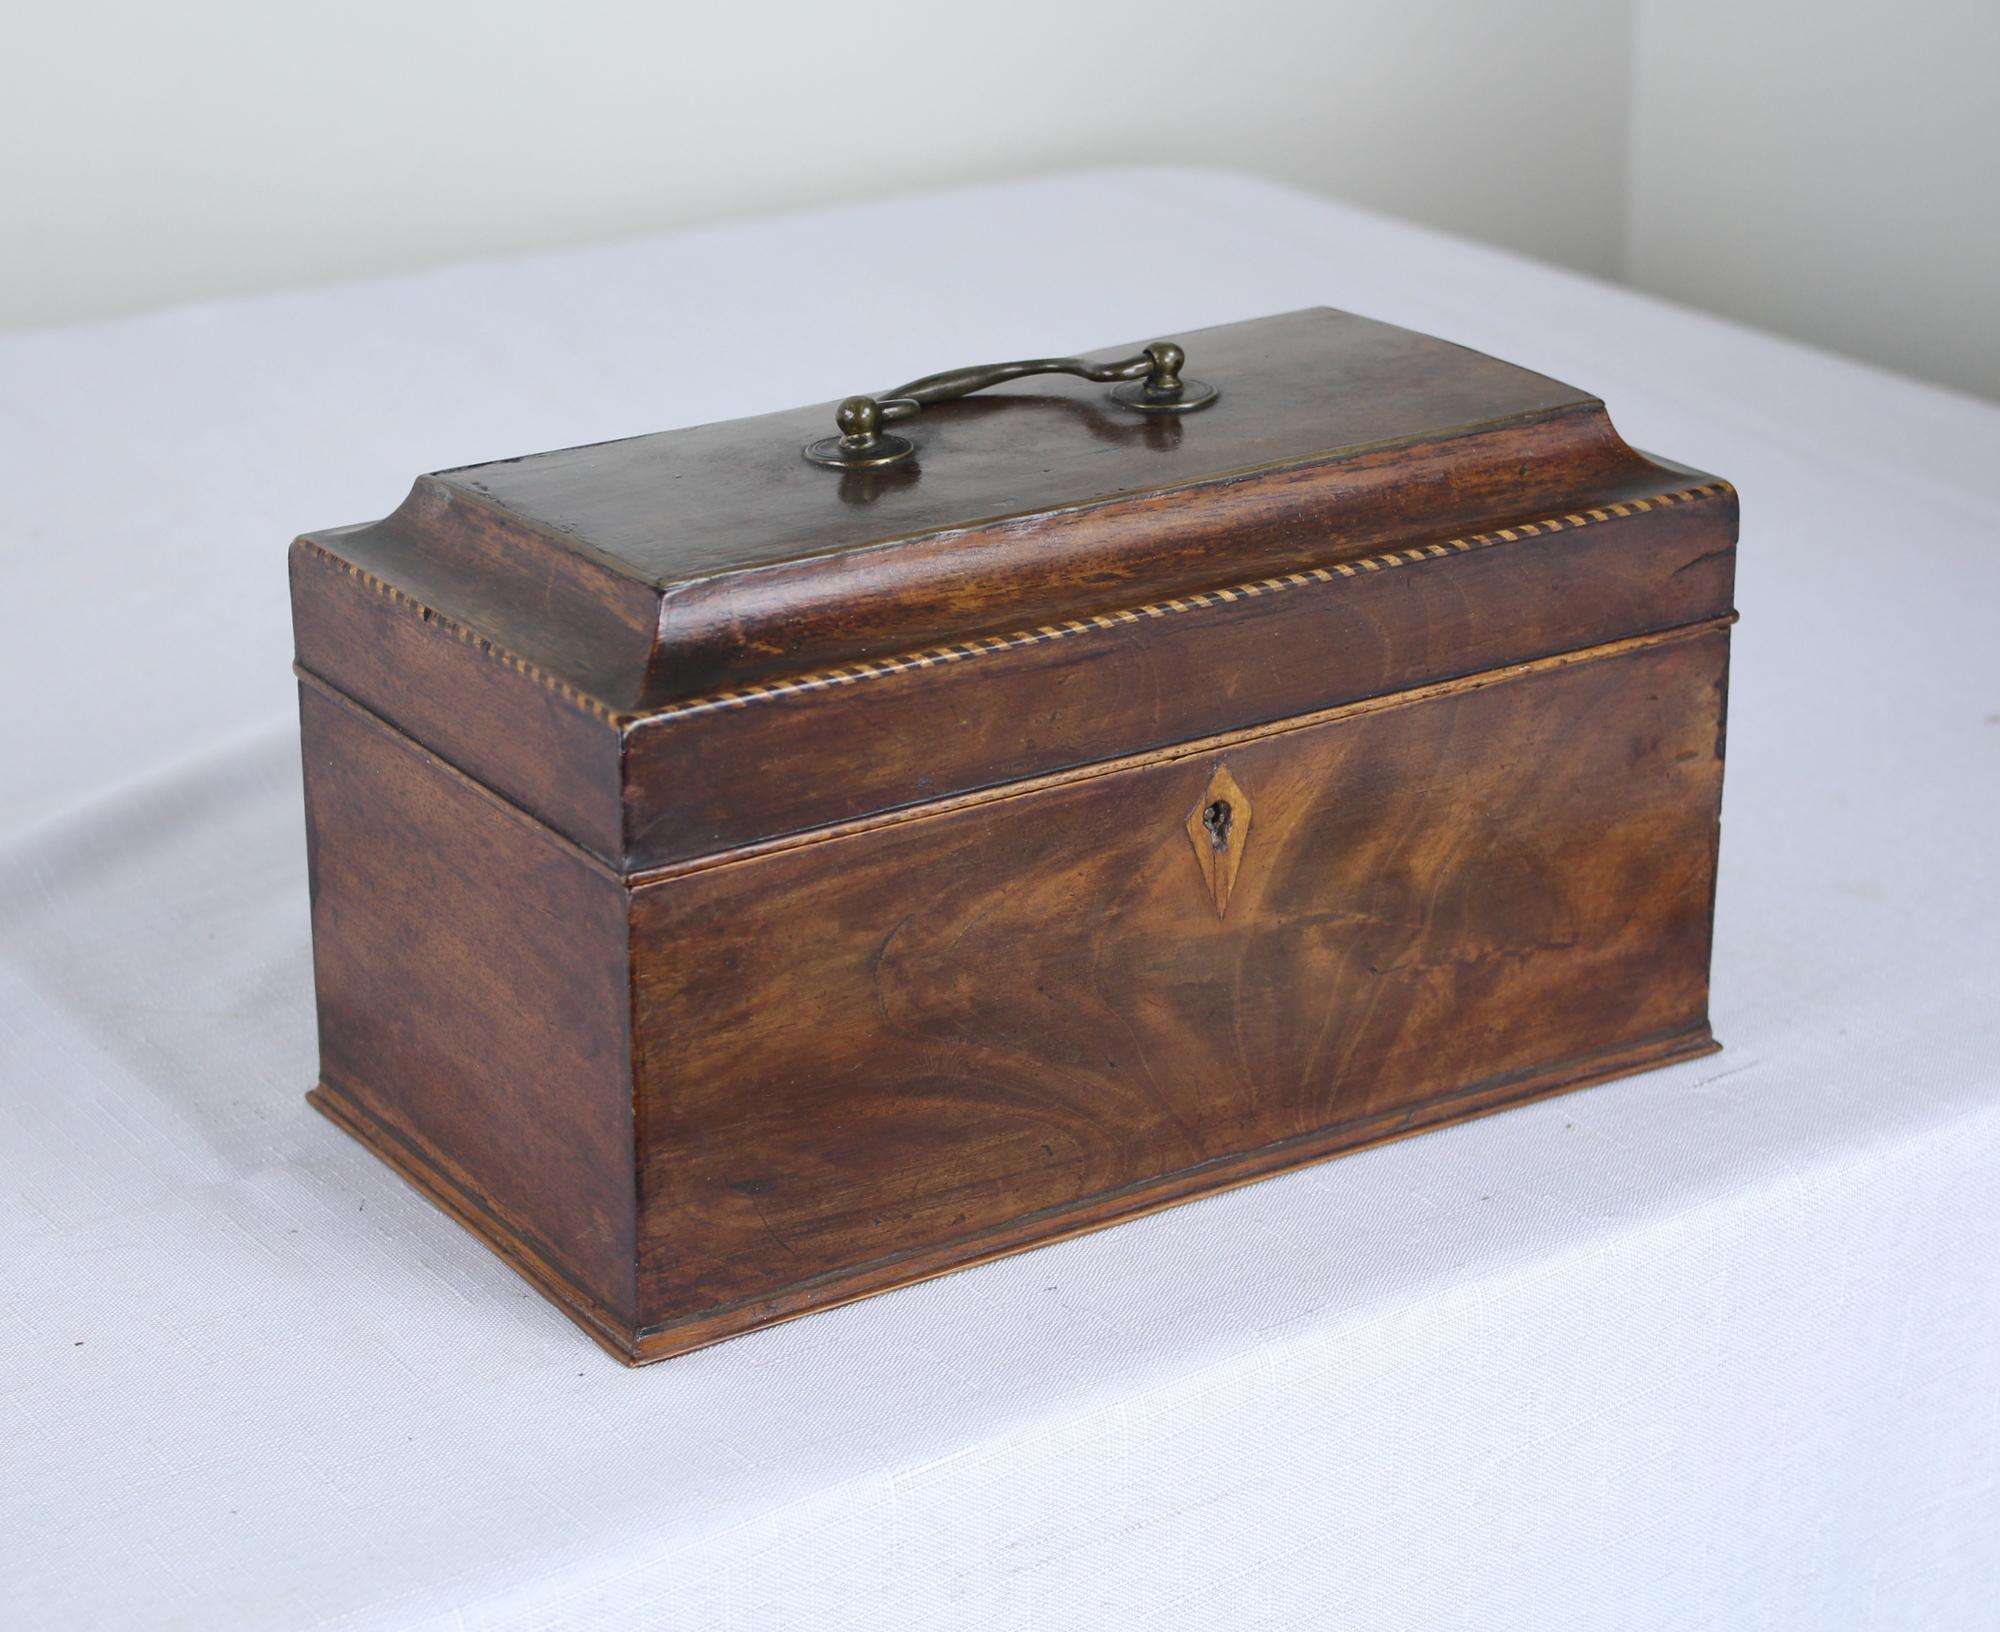 A splendid early sarcophagus shaped mahogany tea caddy with fanciful satinwood and ebony stringing about the top, circa 1780. Good color and patina and in very nice antique condition. The dividers in the interior have been replaced. No key.

